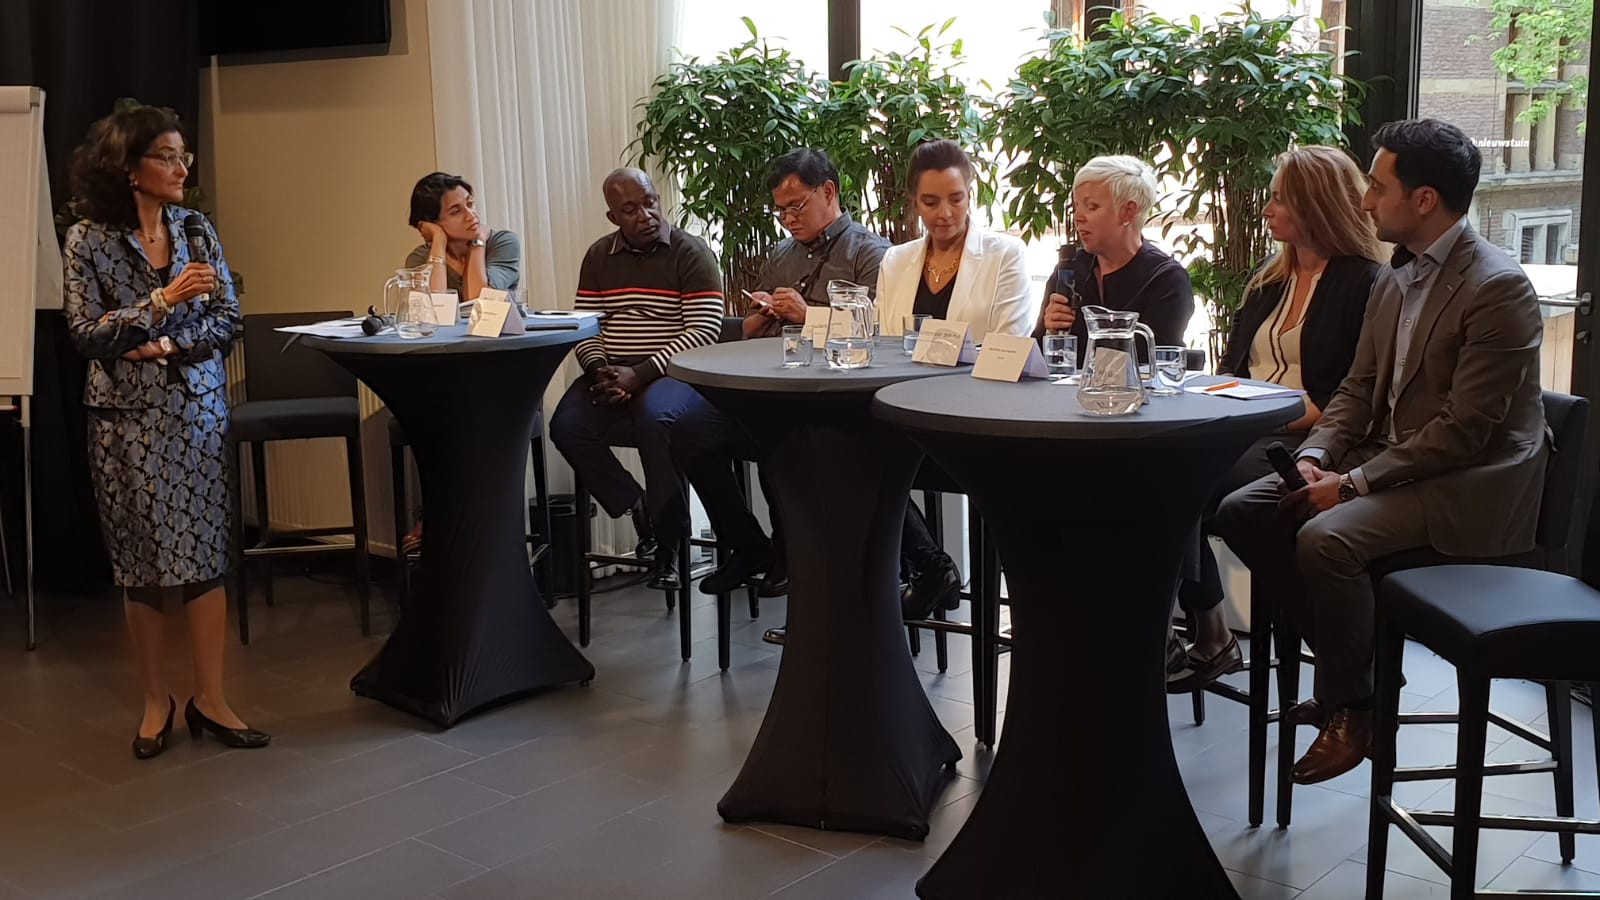 Panel discussion with lobby tour participants and parliamentarians in the Hague2